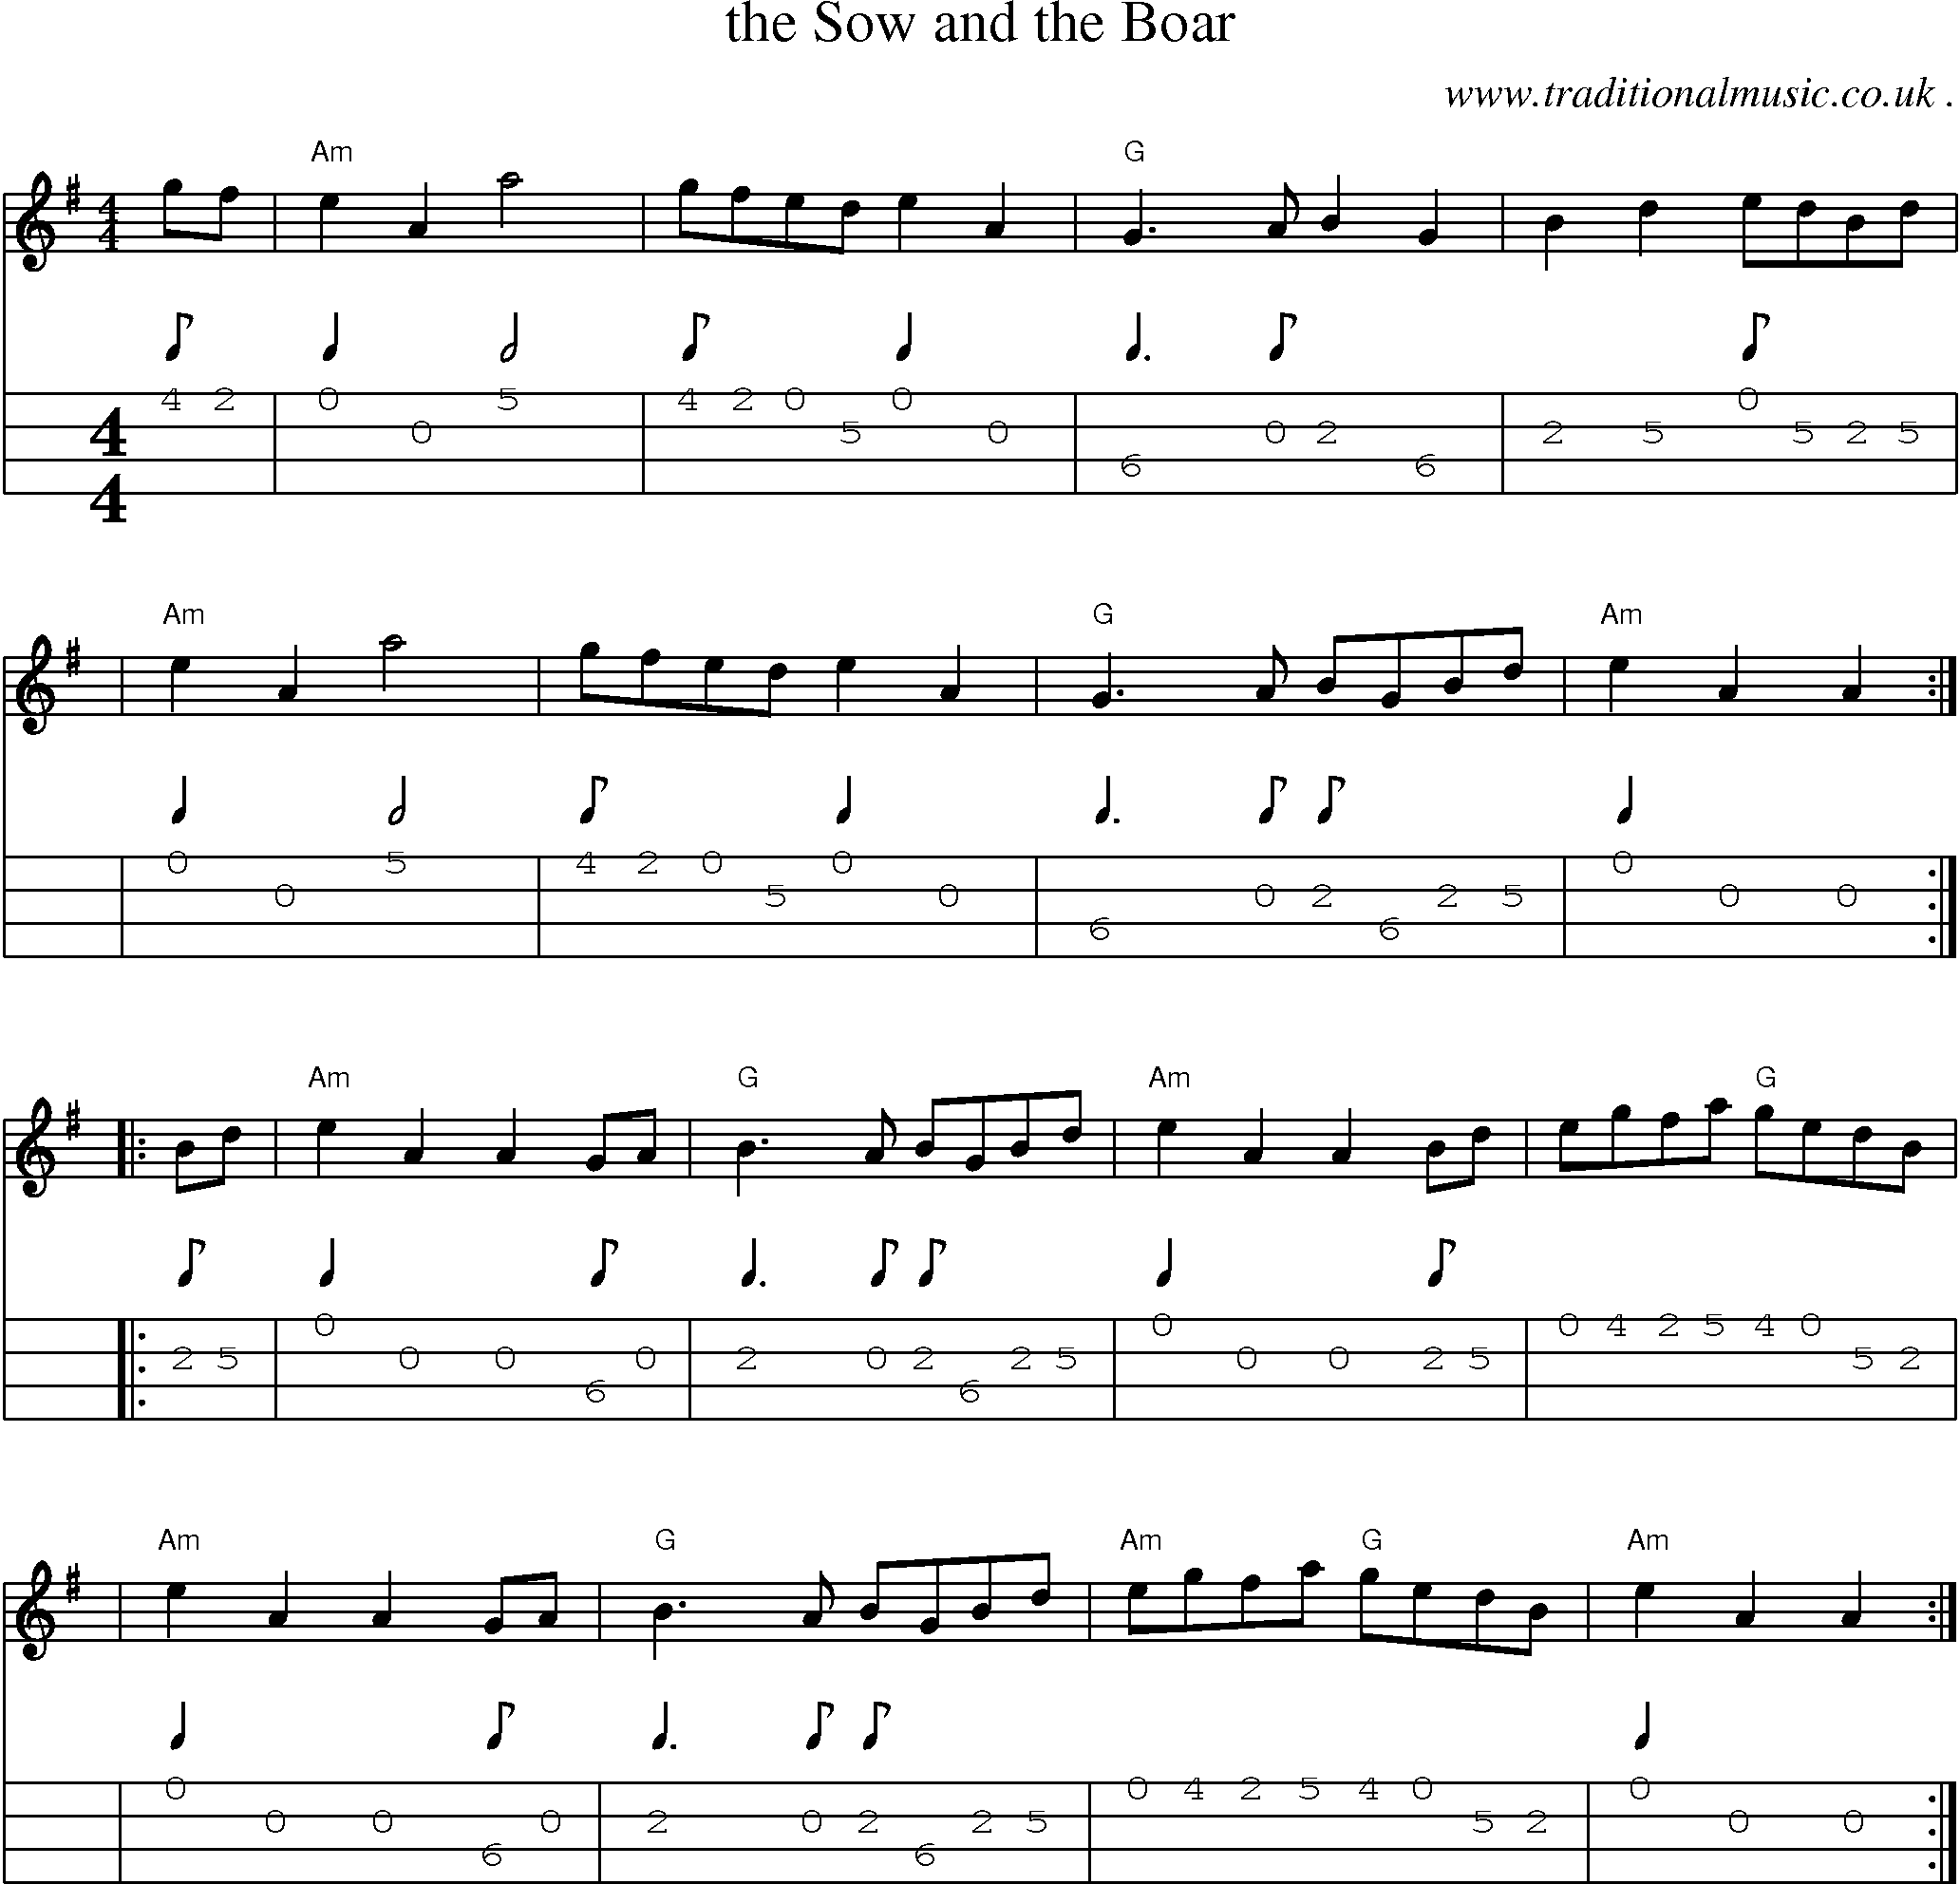 Sheet-music  score, Chords and Mandolin Tabs for The Sow And The Boar